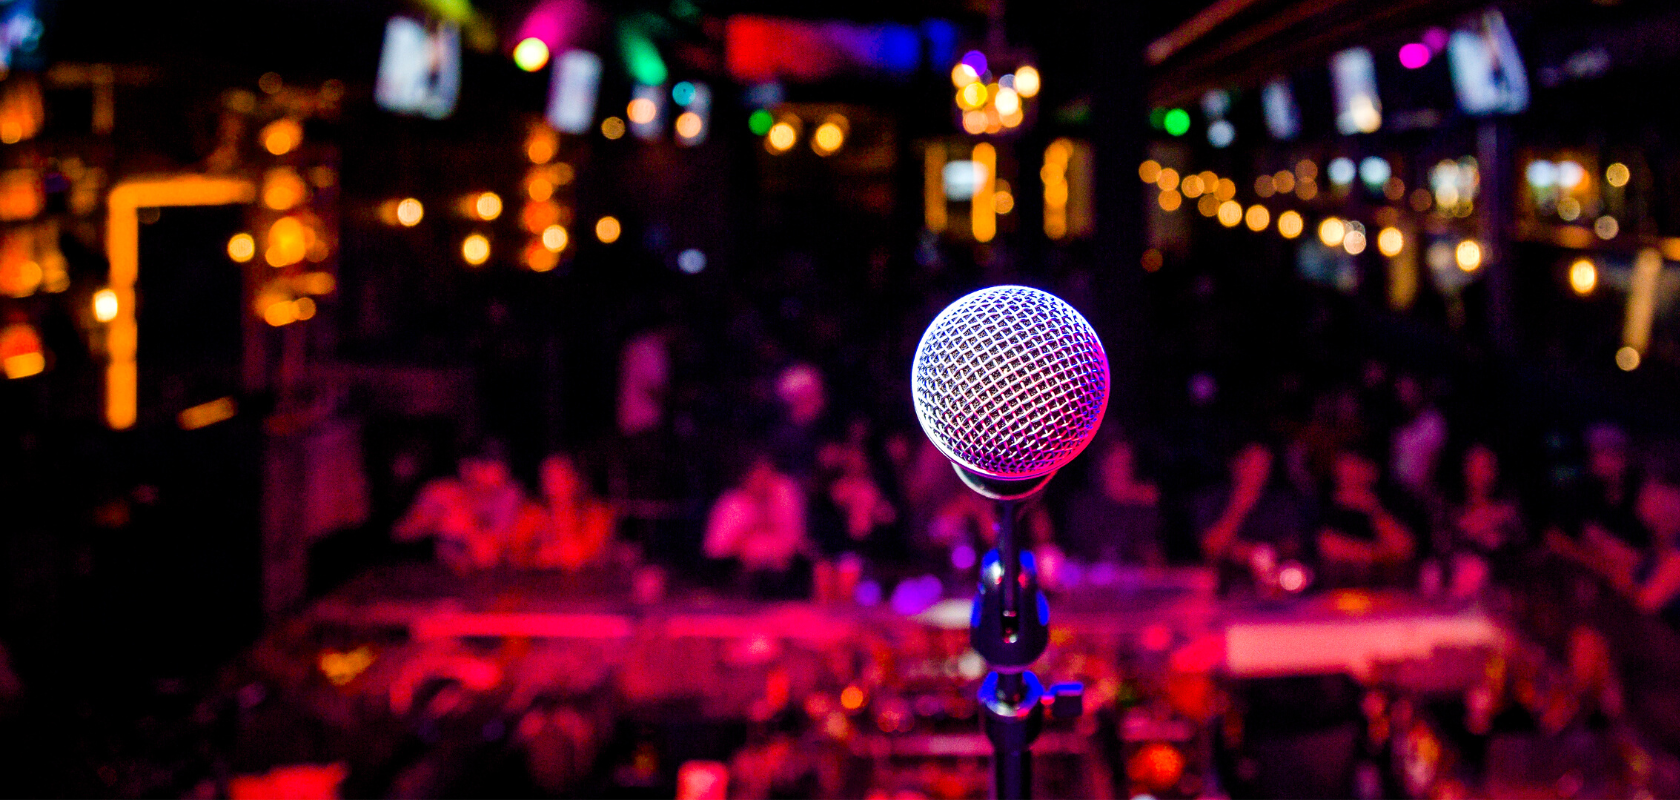 image of microphone in night club theatre style setting.